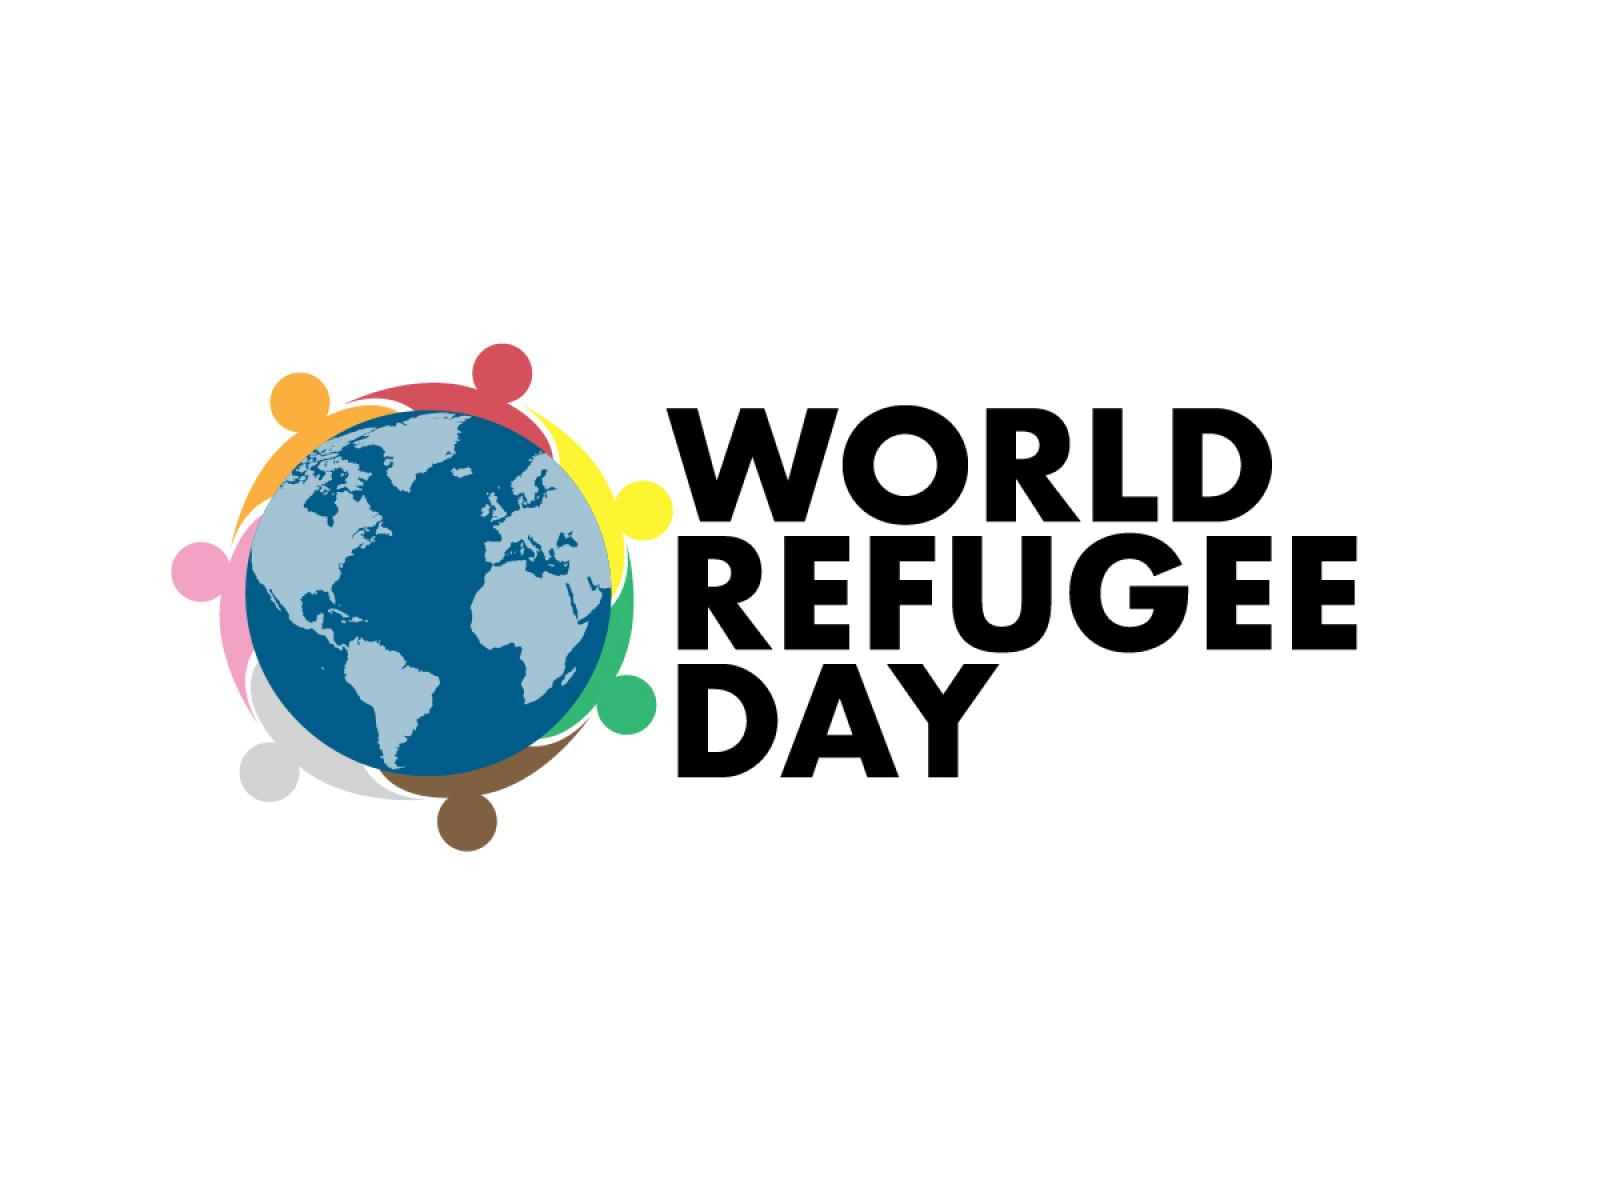 June 20th is World Refugee Day.